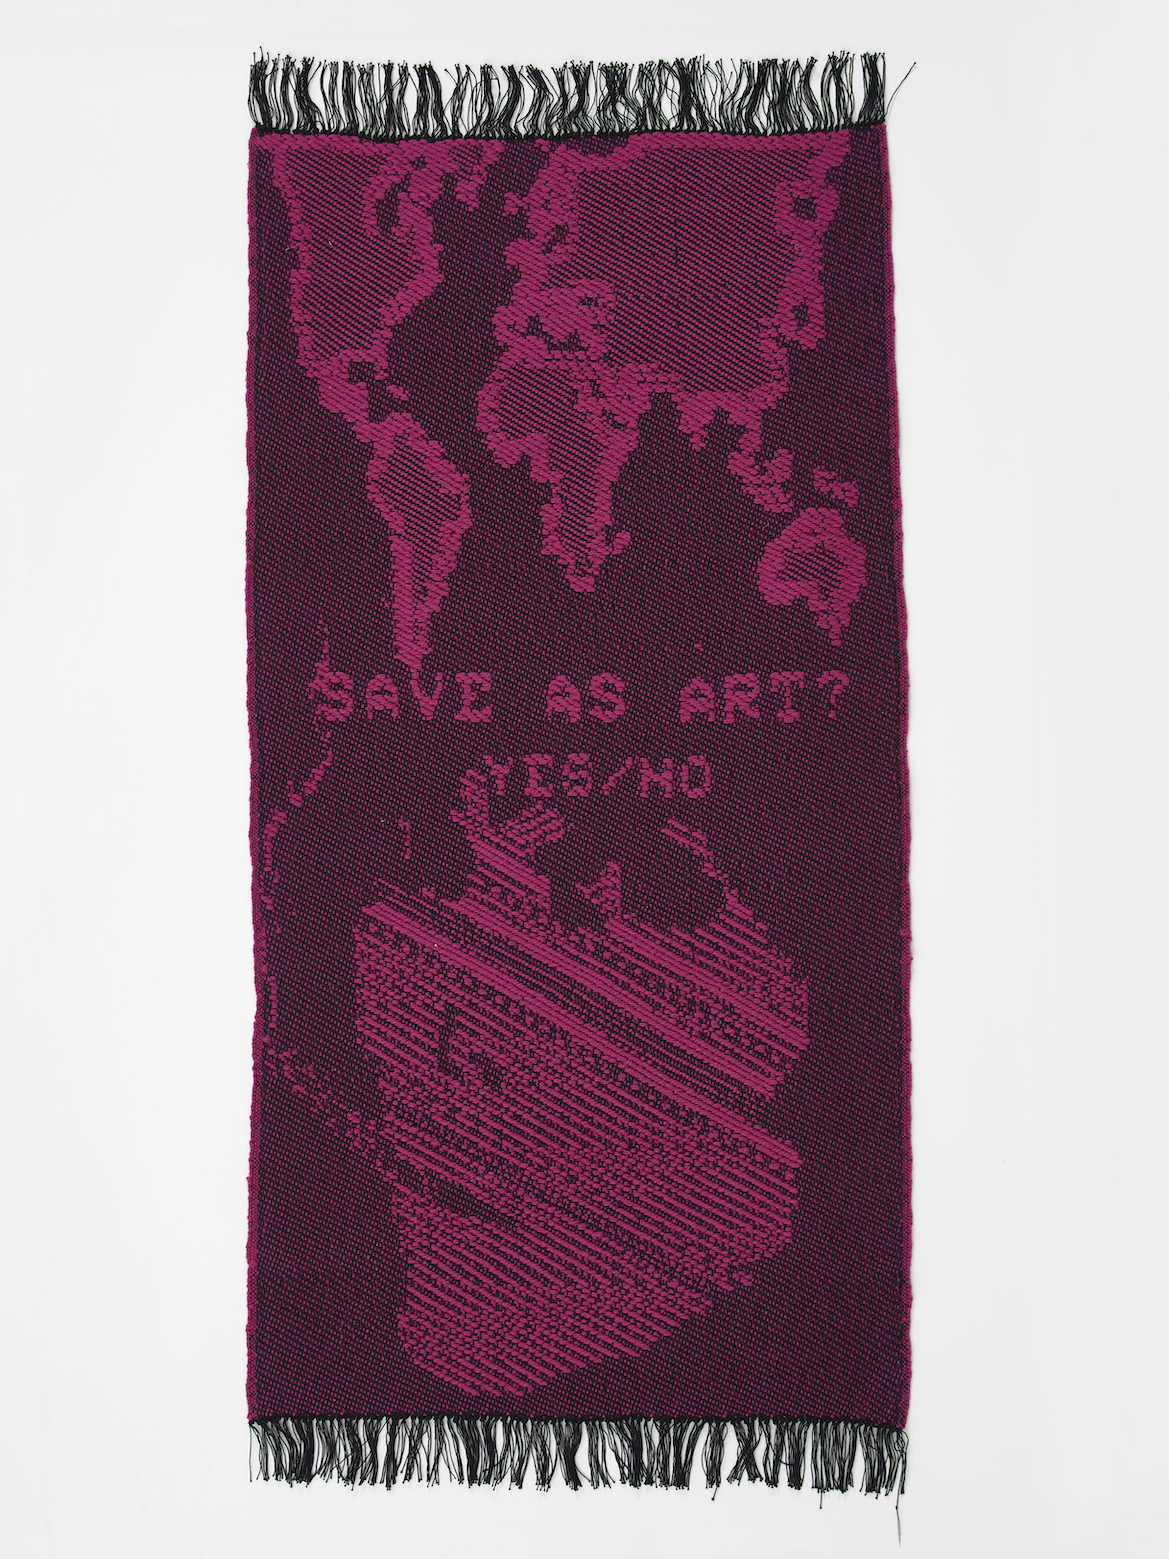 Charlotte Johannesson, “Save as Art Yes/No” (2019)